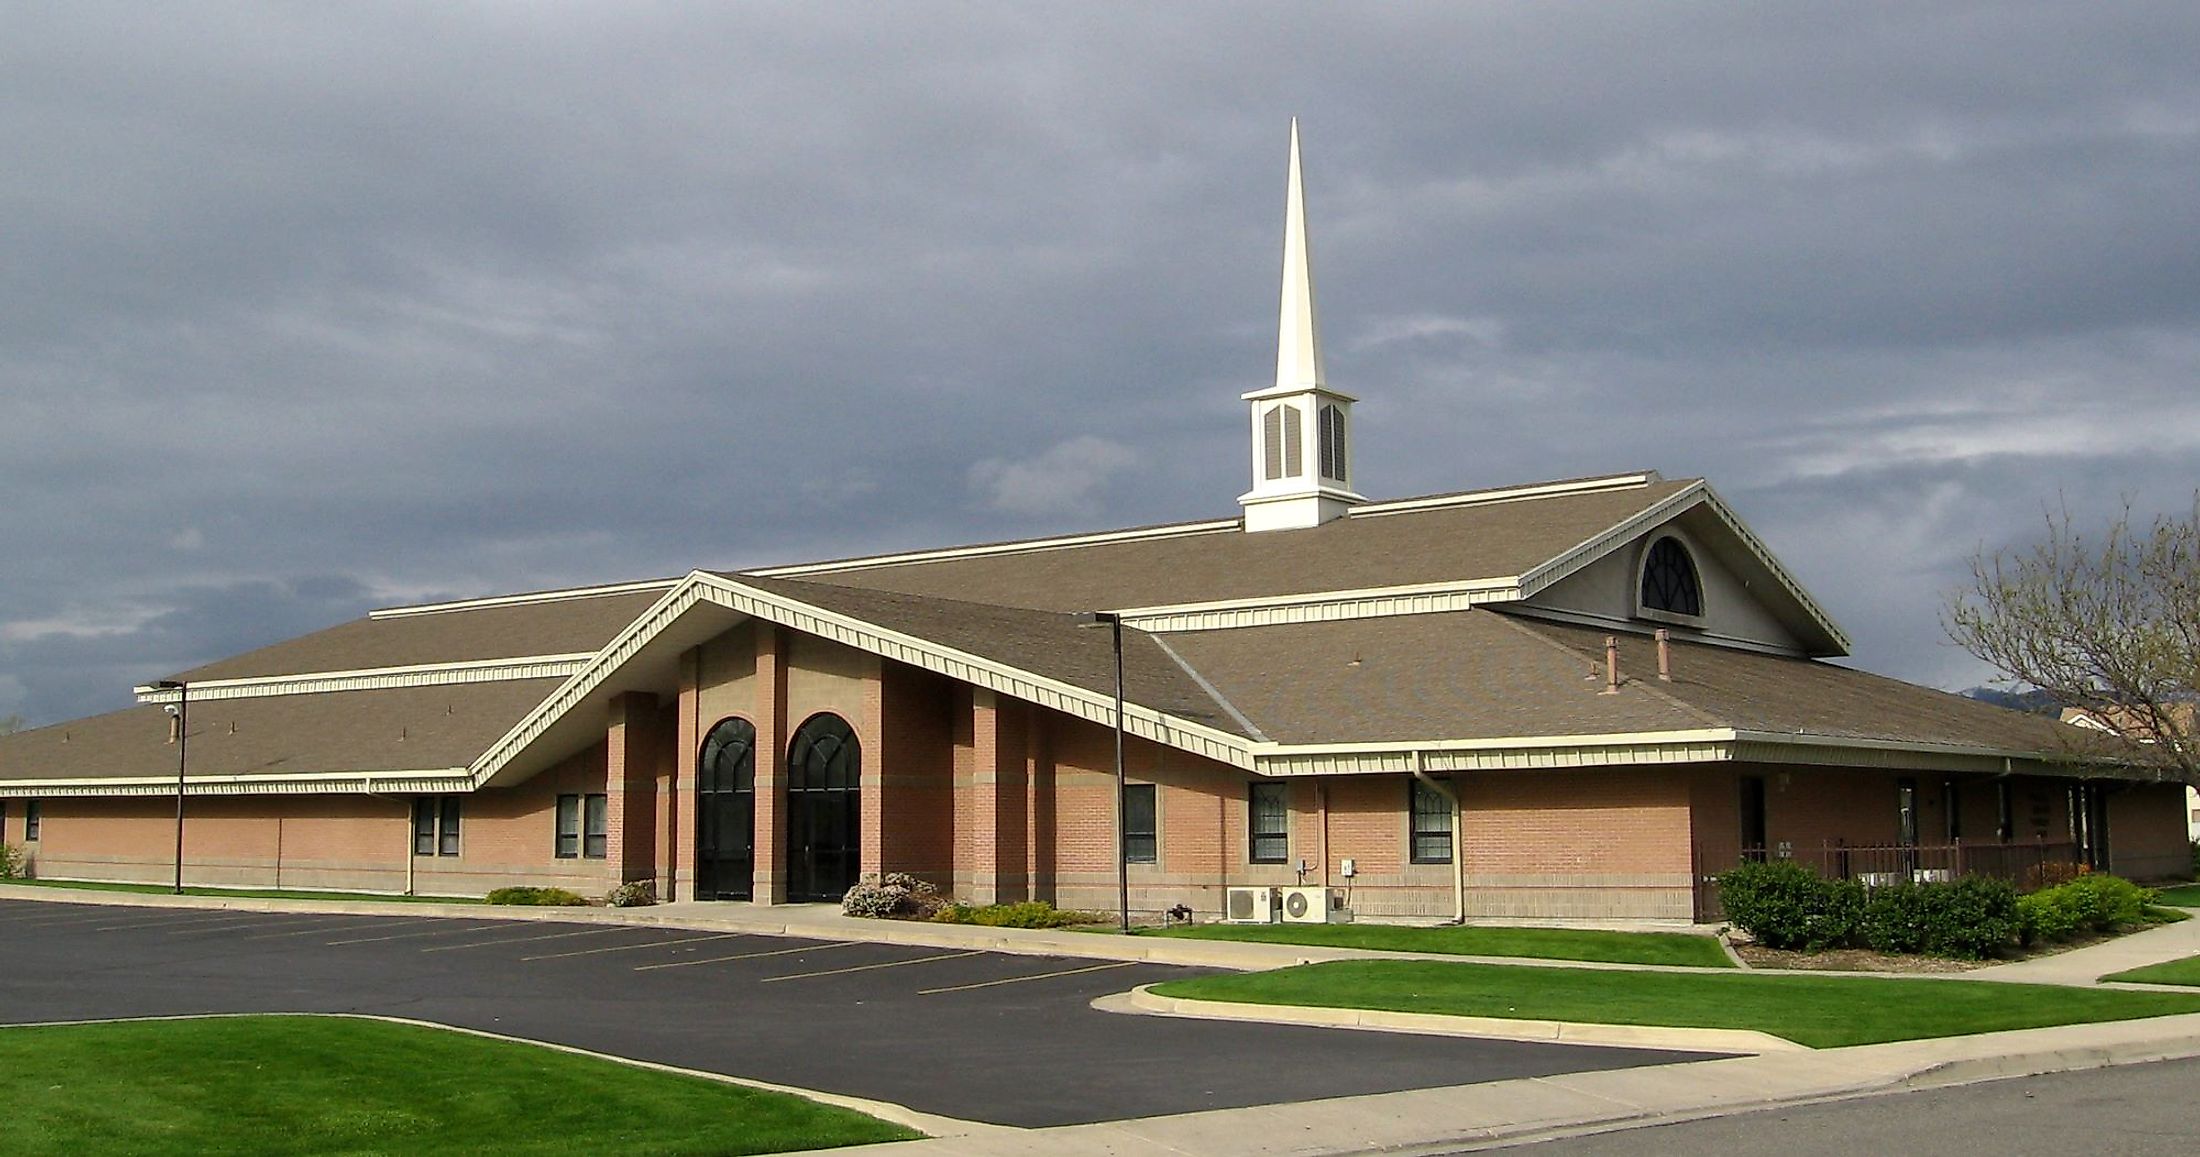  A stake center of The Church of Jesus Christ of Latter-day Saints in West Valley City, Utah. Image Credit: Leon7, via Wikimedia Commons